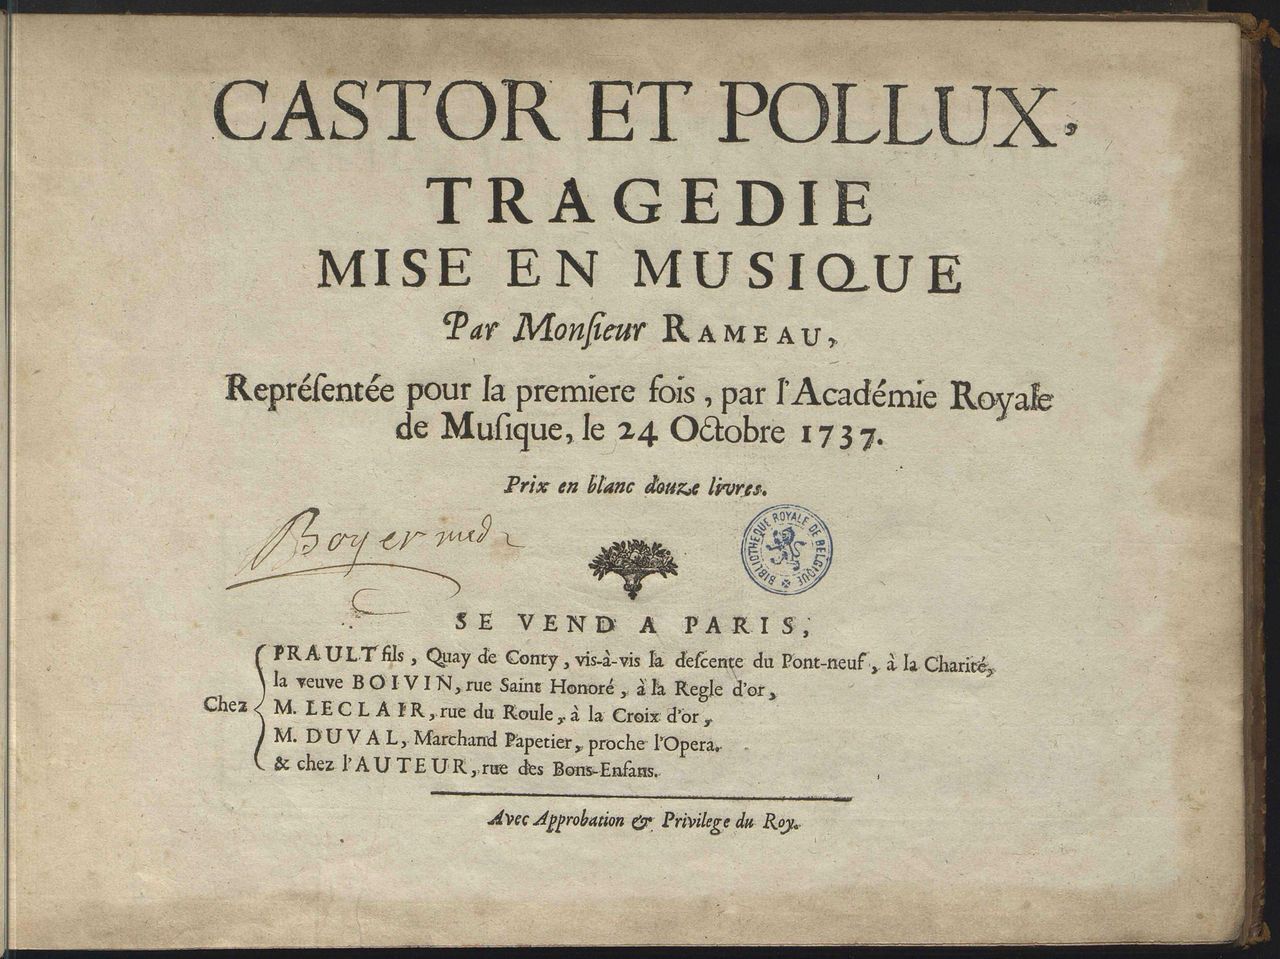 Castor and Pollux, a masterful example of orchestration and harmony